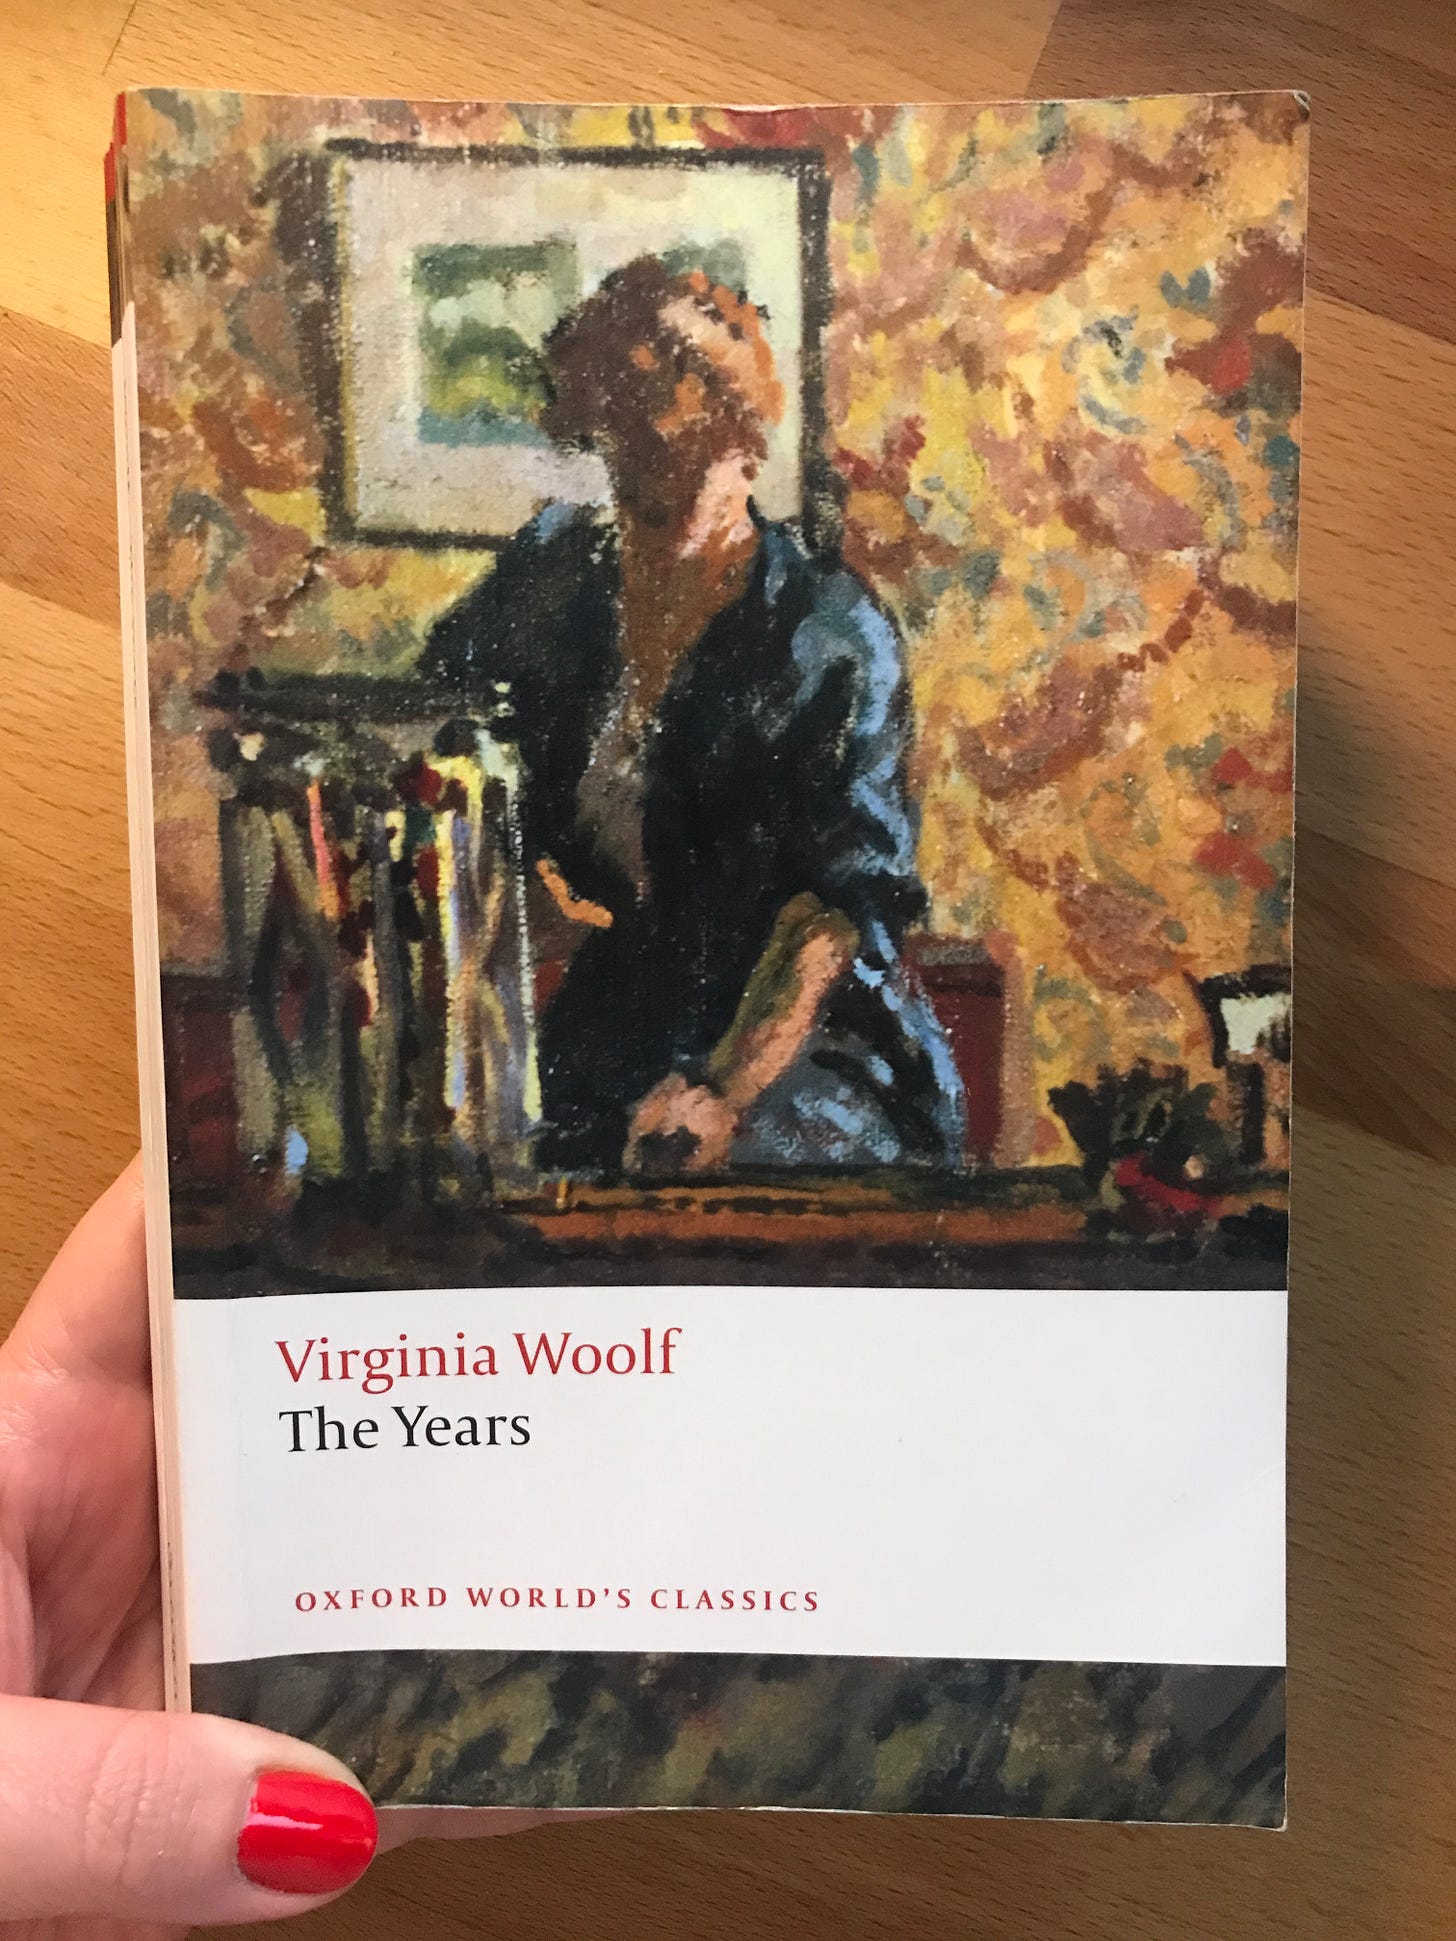 Paperback copy of Virginia Woolf's The Years (1937), with an impressionist painting of a woman at a desk on the cover.